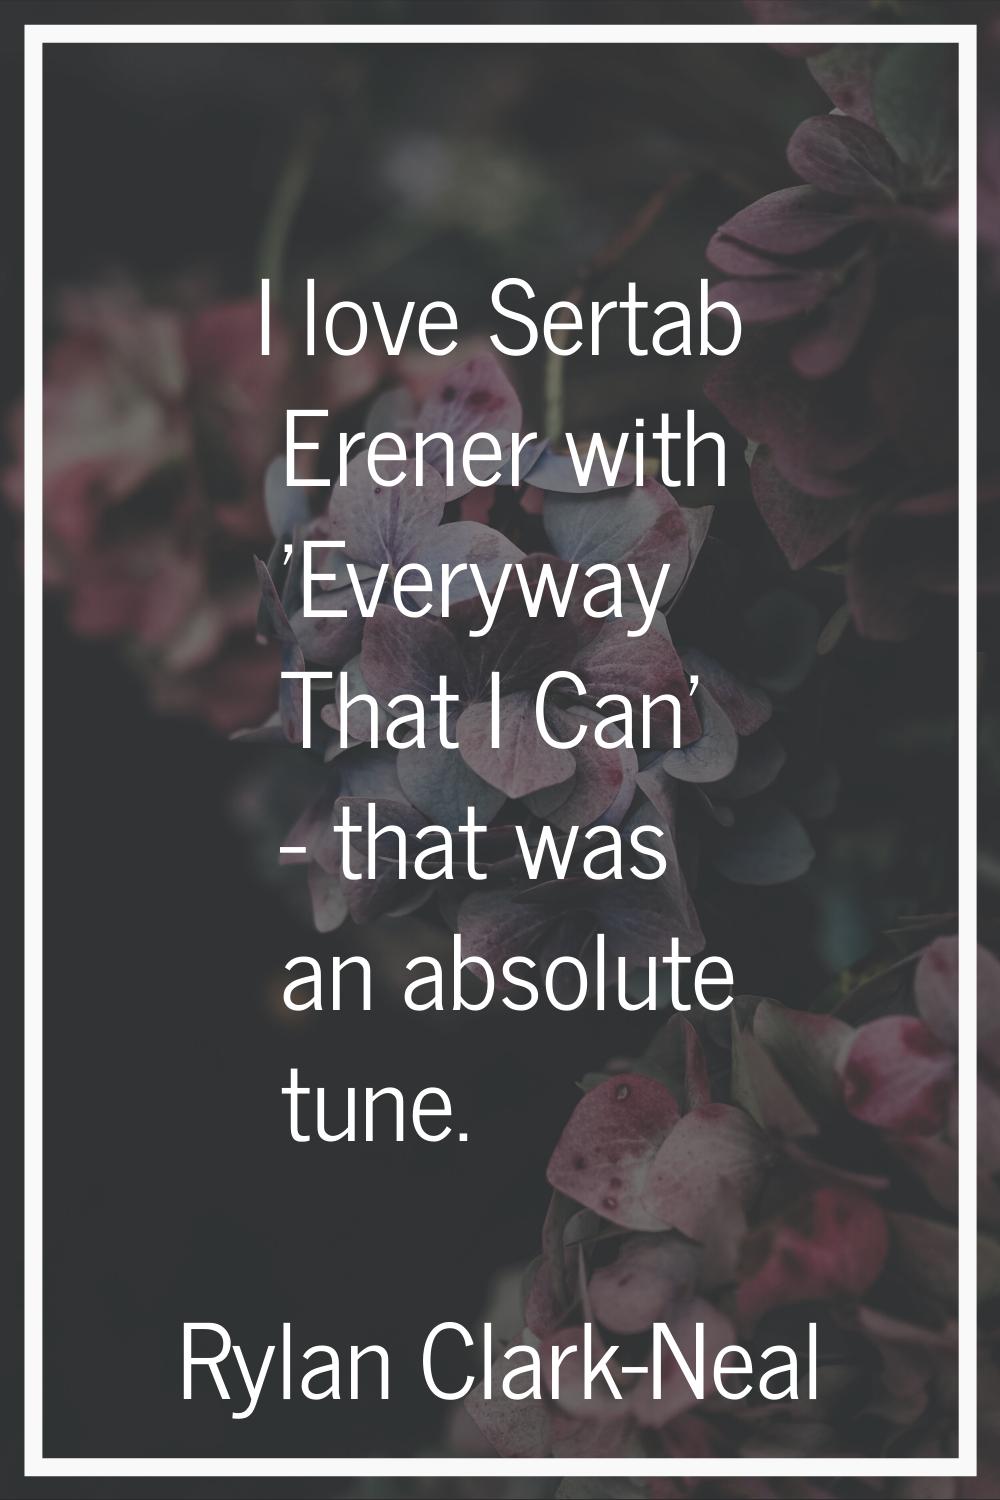 I love Sertab Erener with 'Everyway That I Can' - that was an absolute tune.